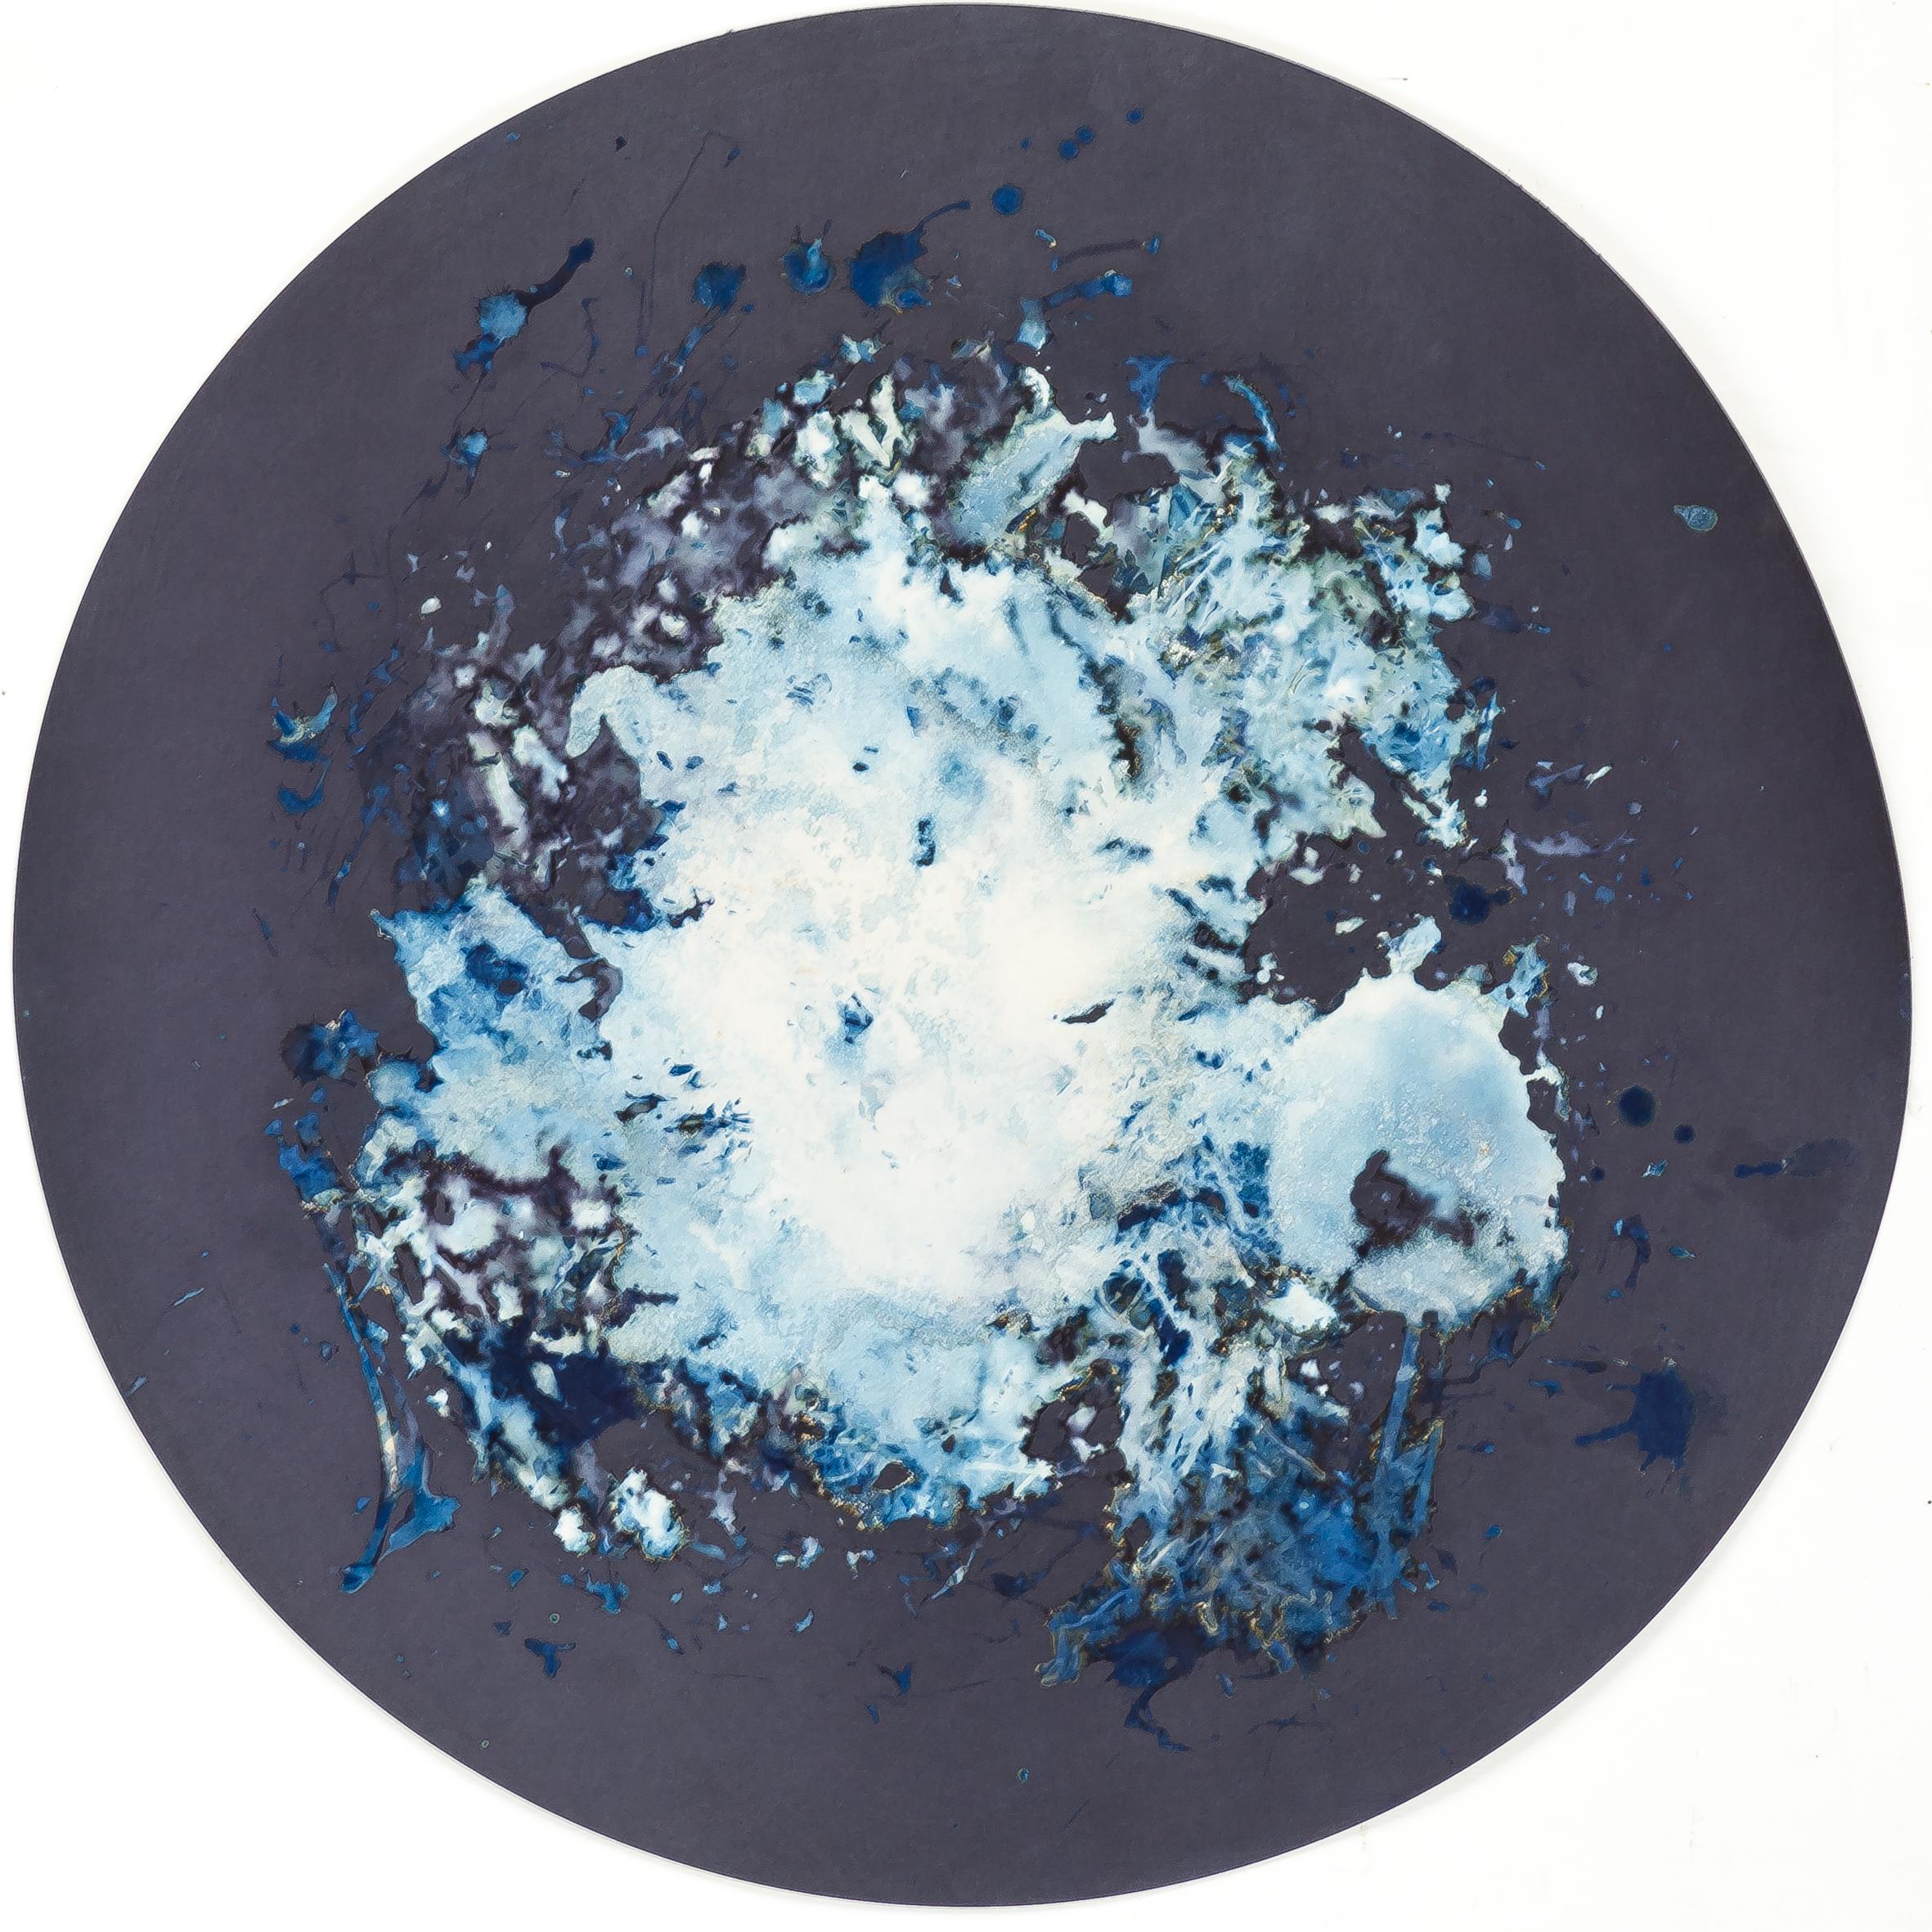 Algas 45-V. From the series Mareas. Cyanotype photograhs Mounted  - Abstract Sculpture by Paola Davila